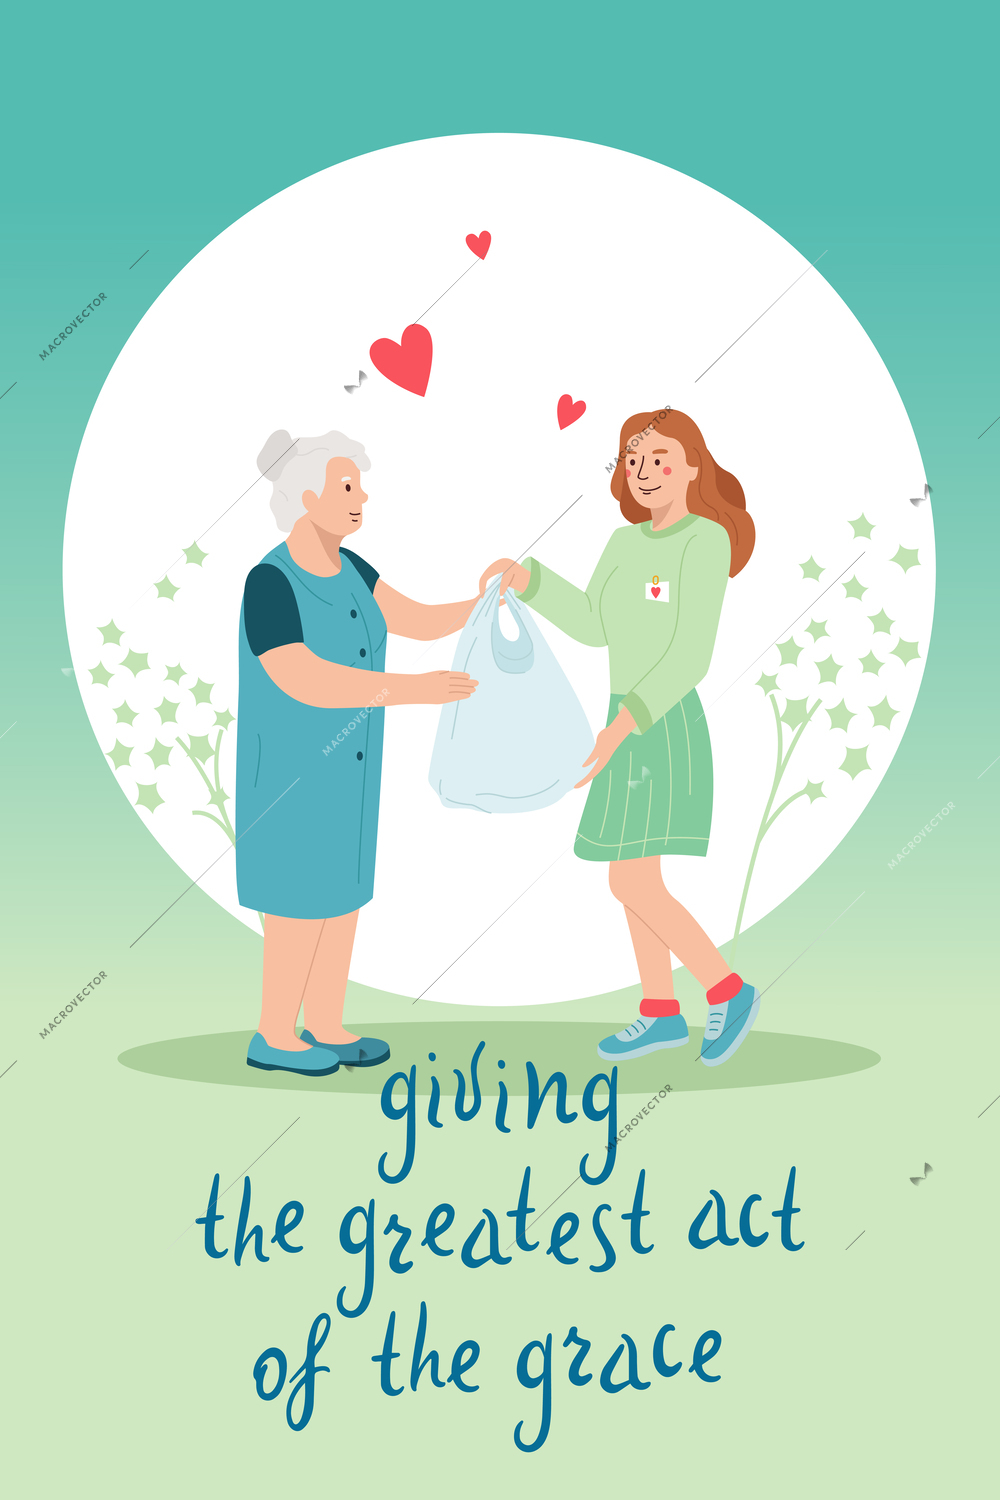 Charity flat background with composition of ornate text and teenage girl giving aid to old woman vector illustration